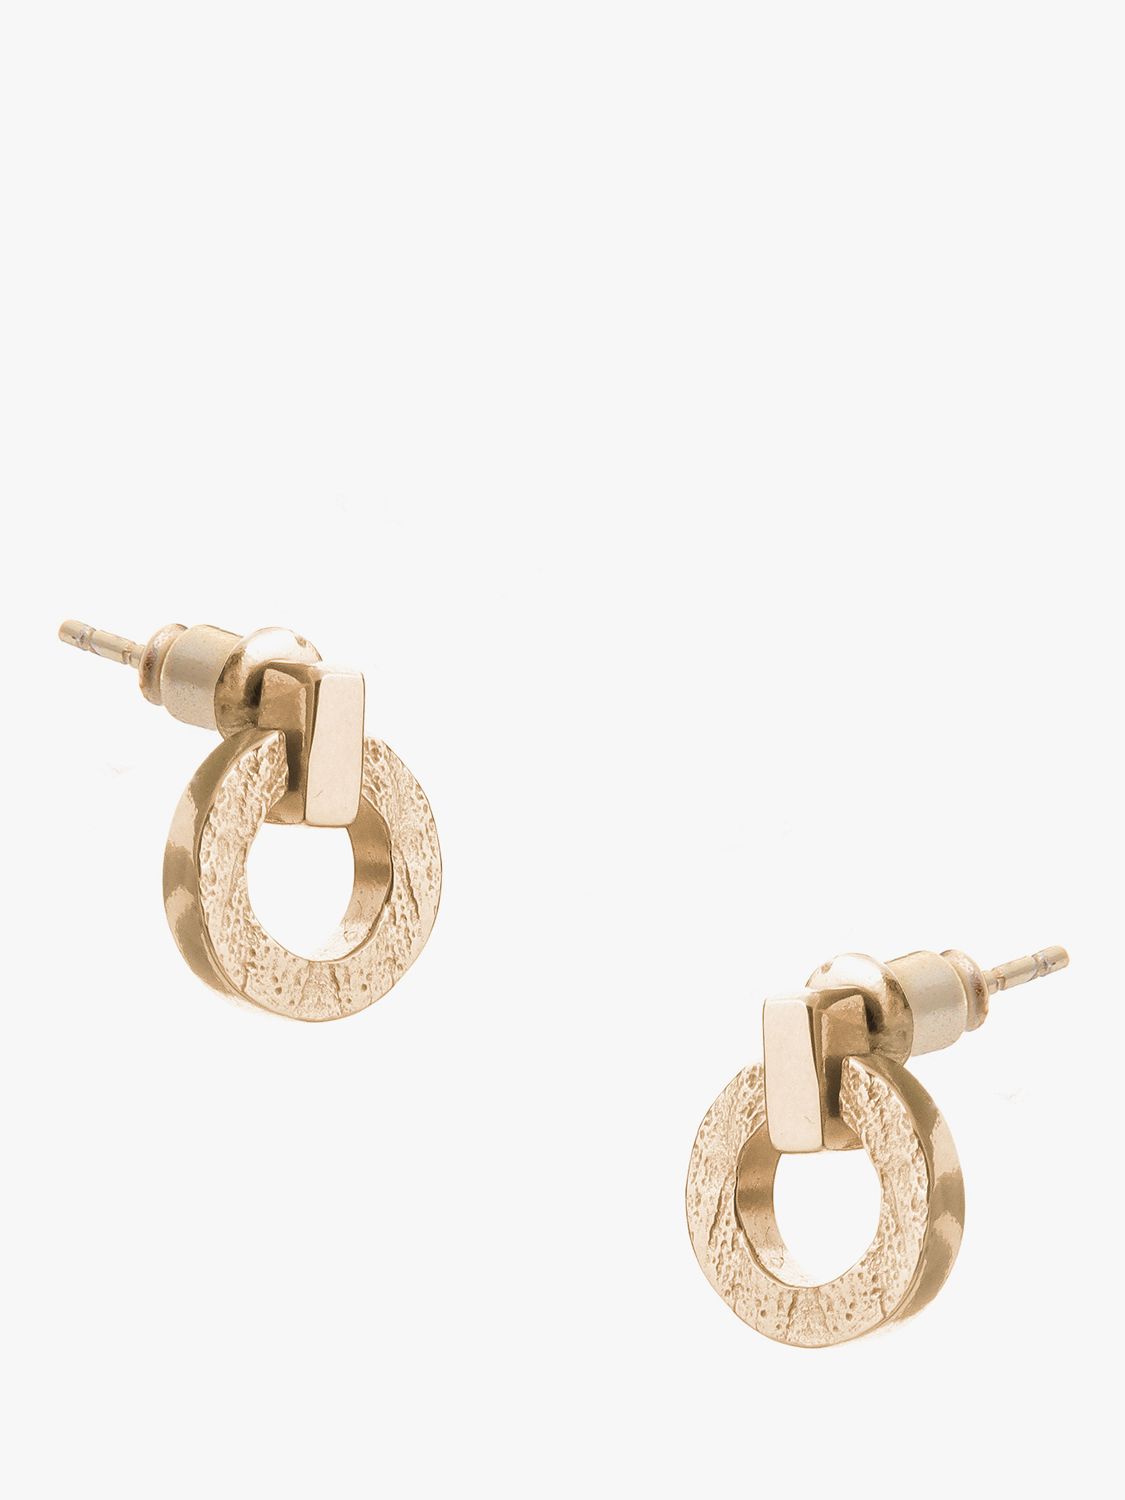 Tutti & Co Palm Collection Textured Circle Stud Earrings, Gold